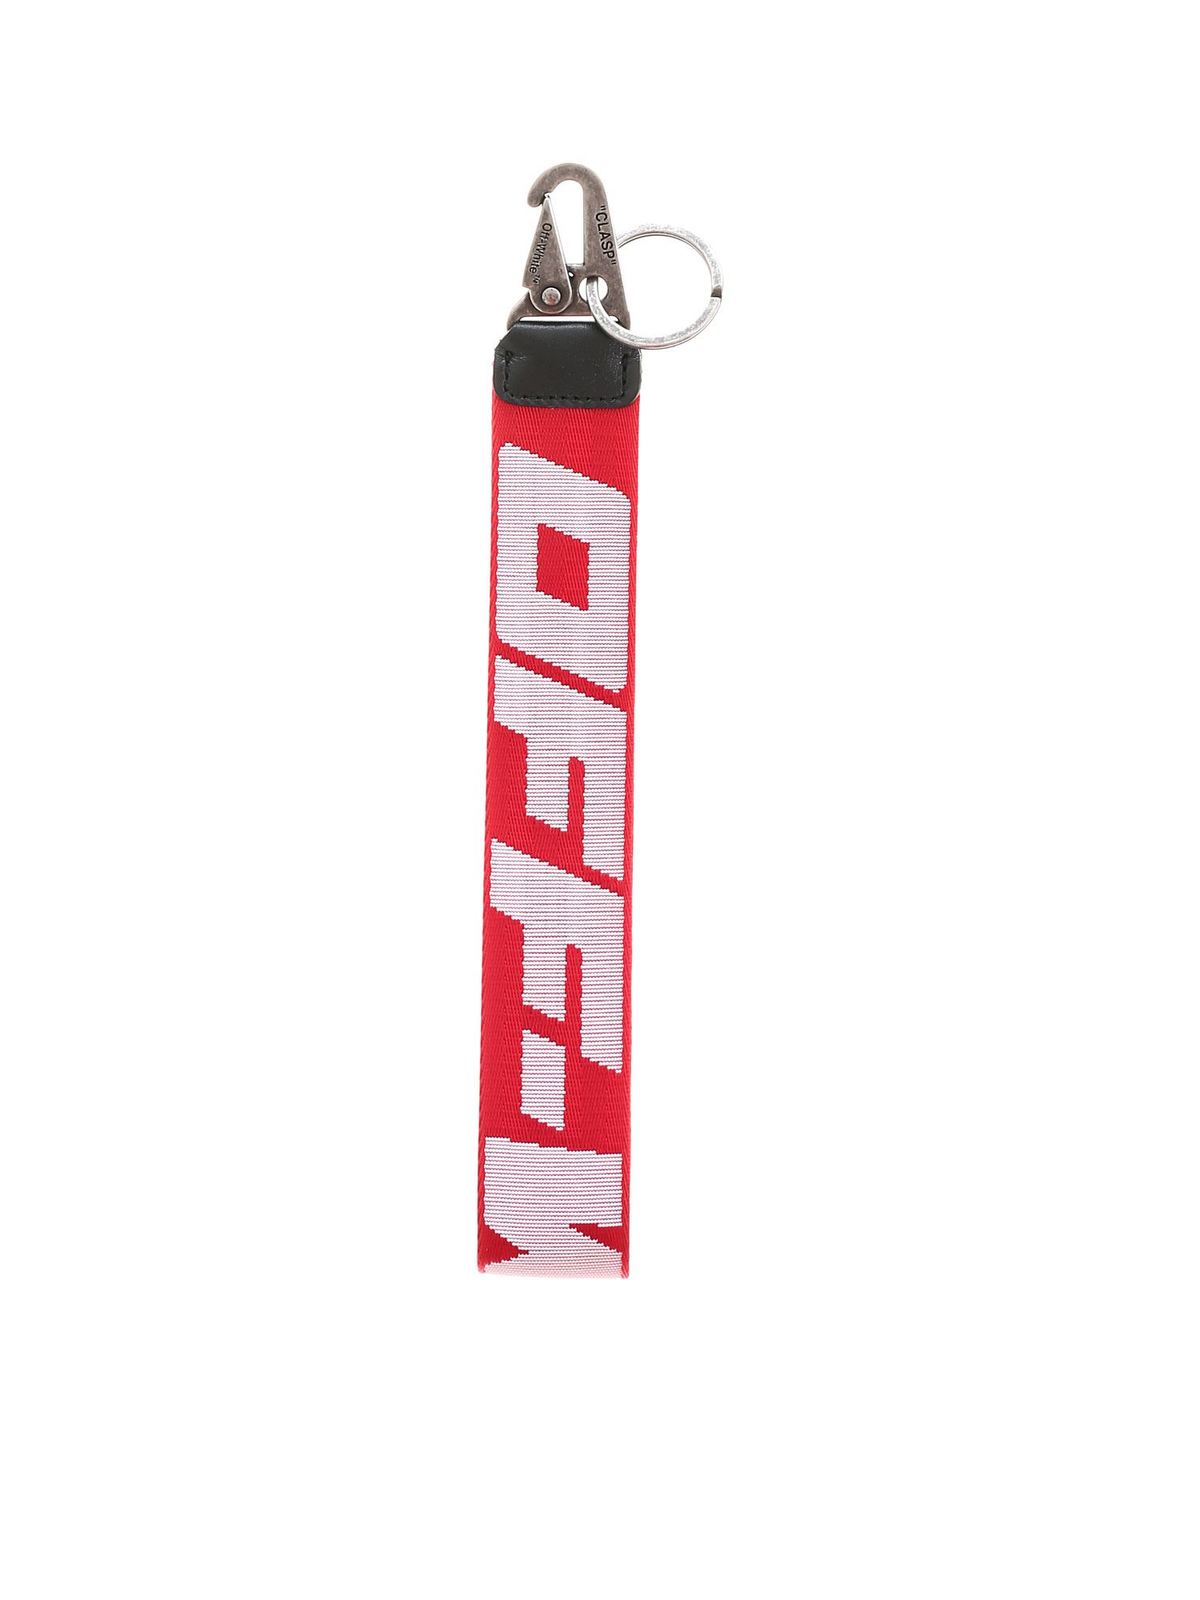 OFF-WHITE 20 KEYRING IN RED